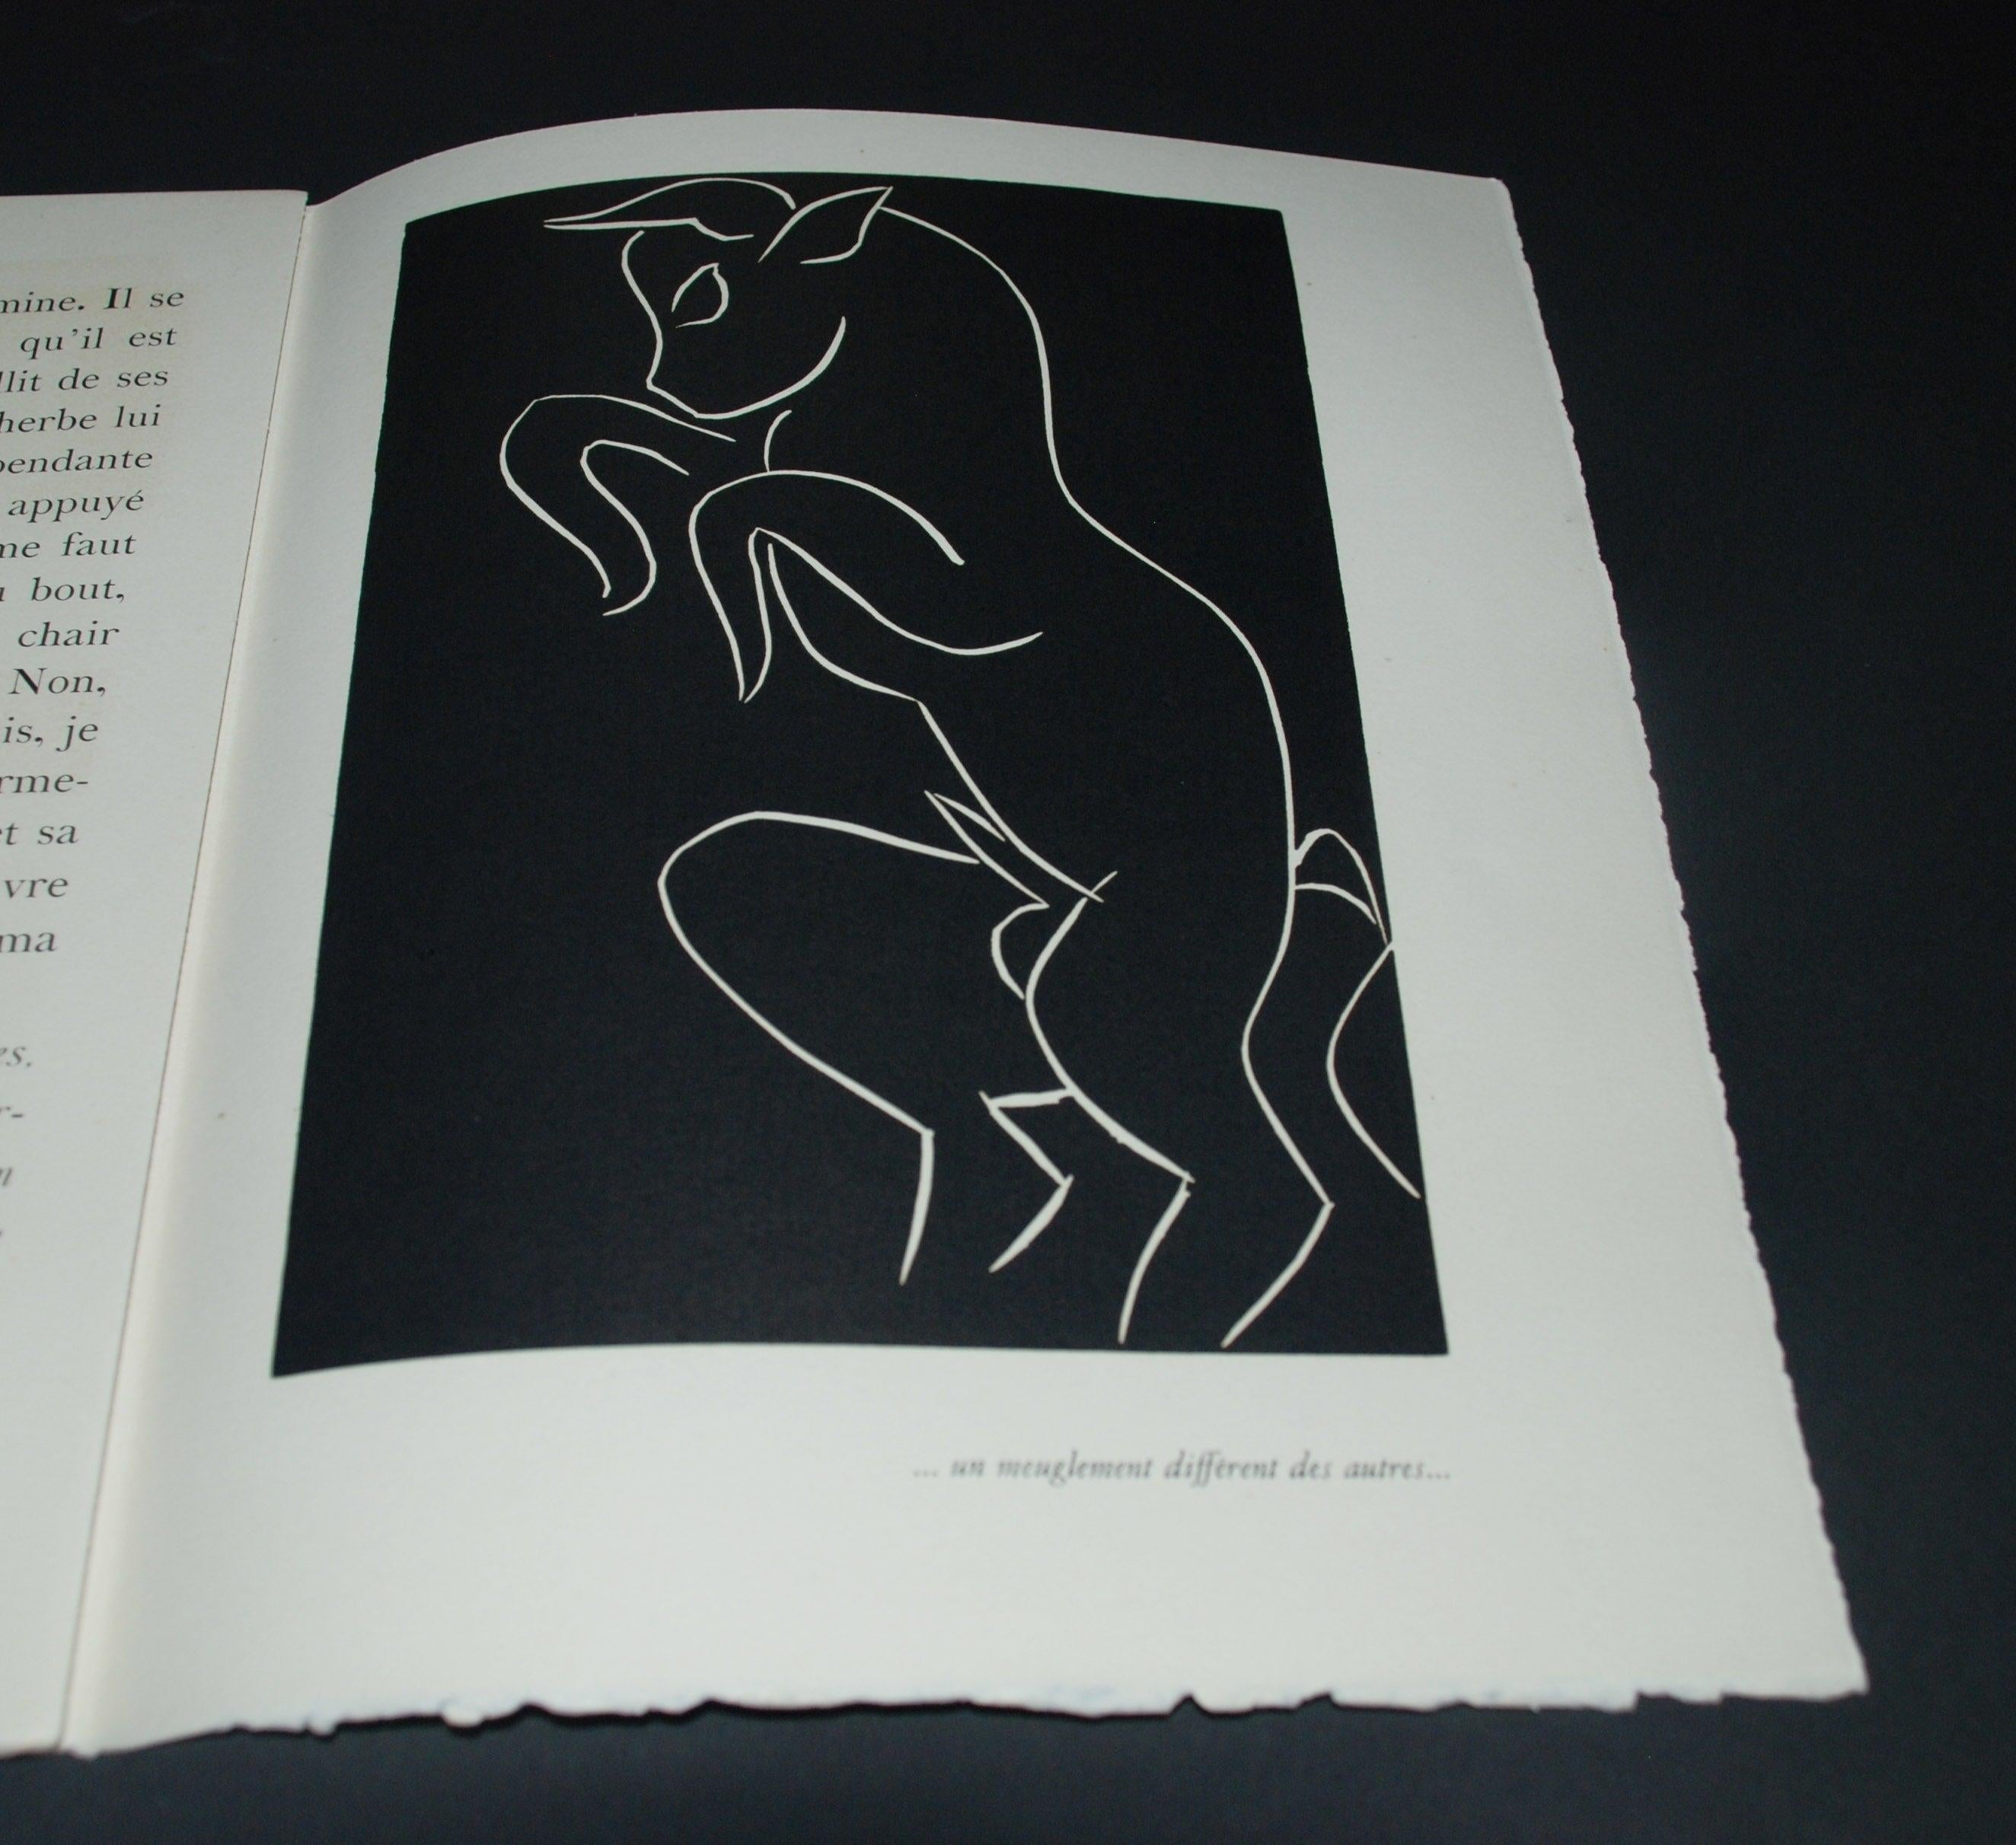 Plate 15: Un Meuglement Different des Autres (A Moo Different from Others) - Print by Henri Matisse